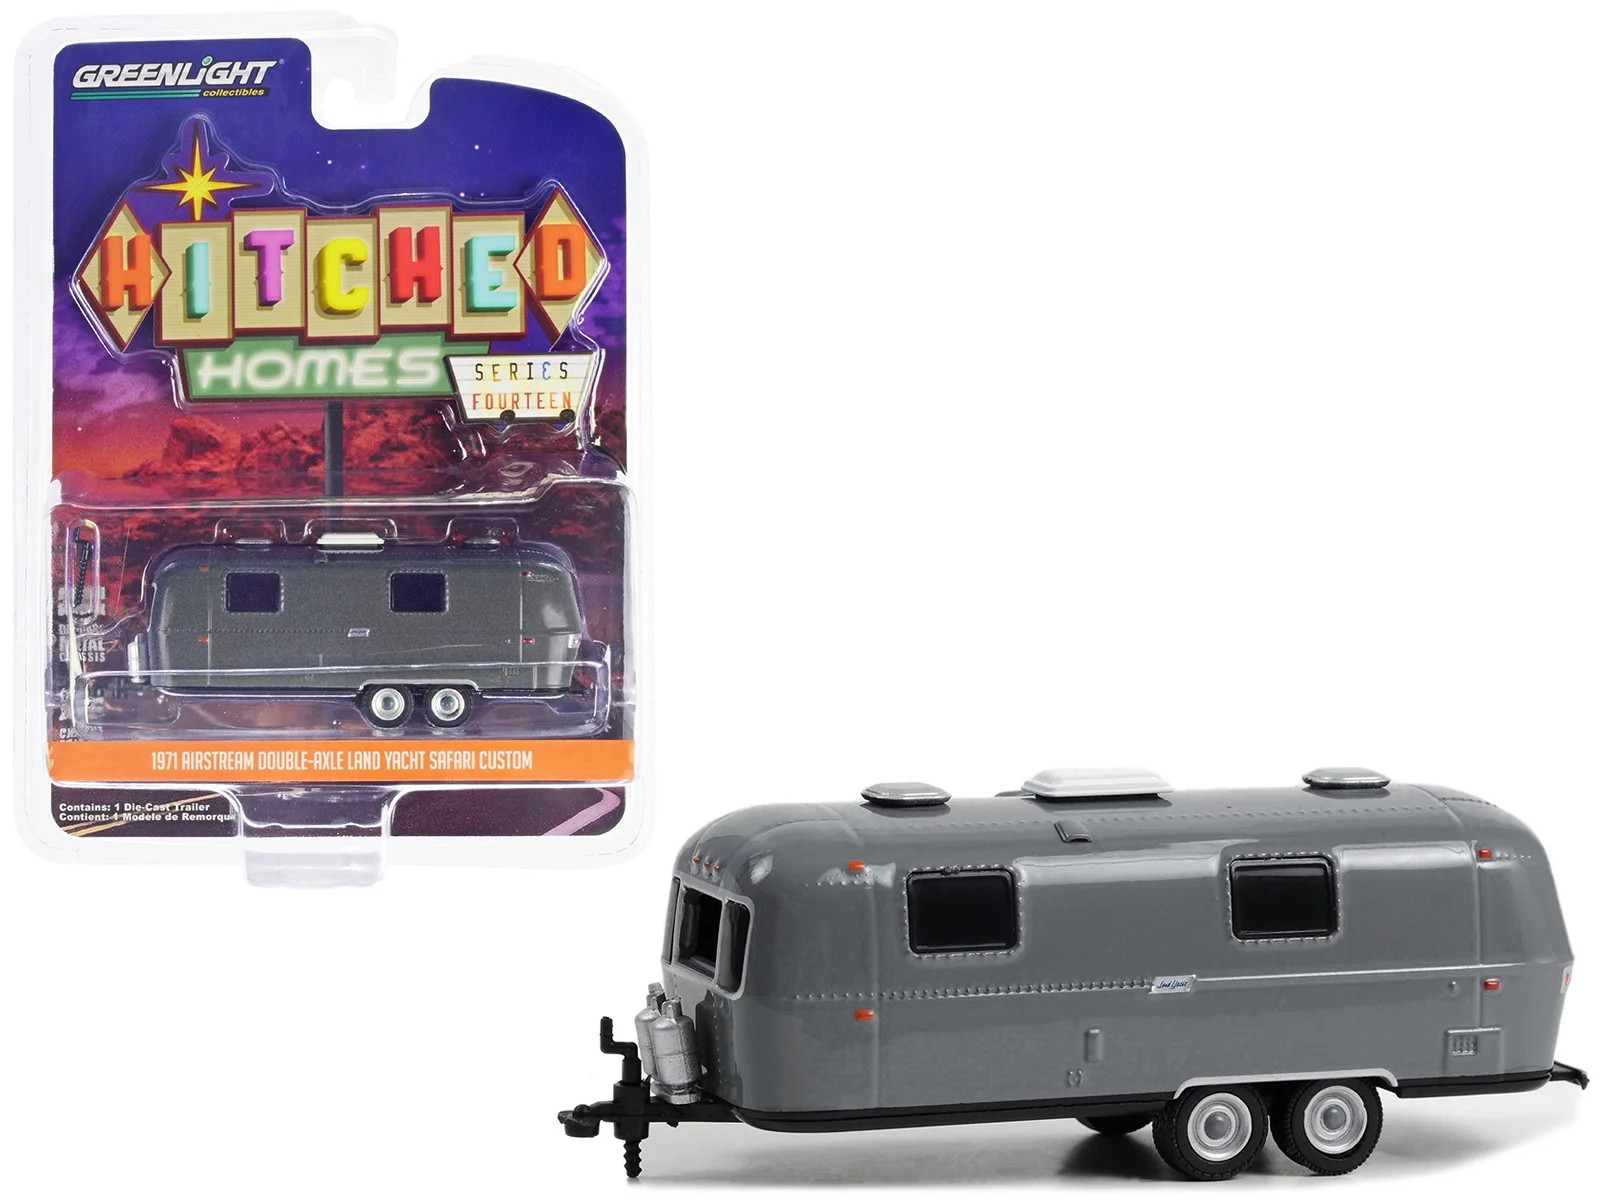 Greenlight 1/64 Hitched Homes Series 14 - 1971 Airstream Double-Axle Land Yacht Safari - Custom Painted Gray Solid Pack 34140-D - Thumbnail